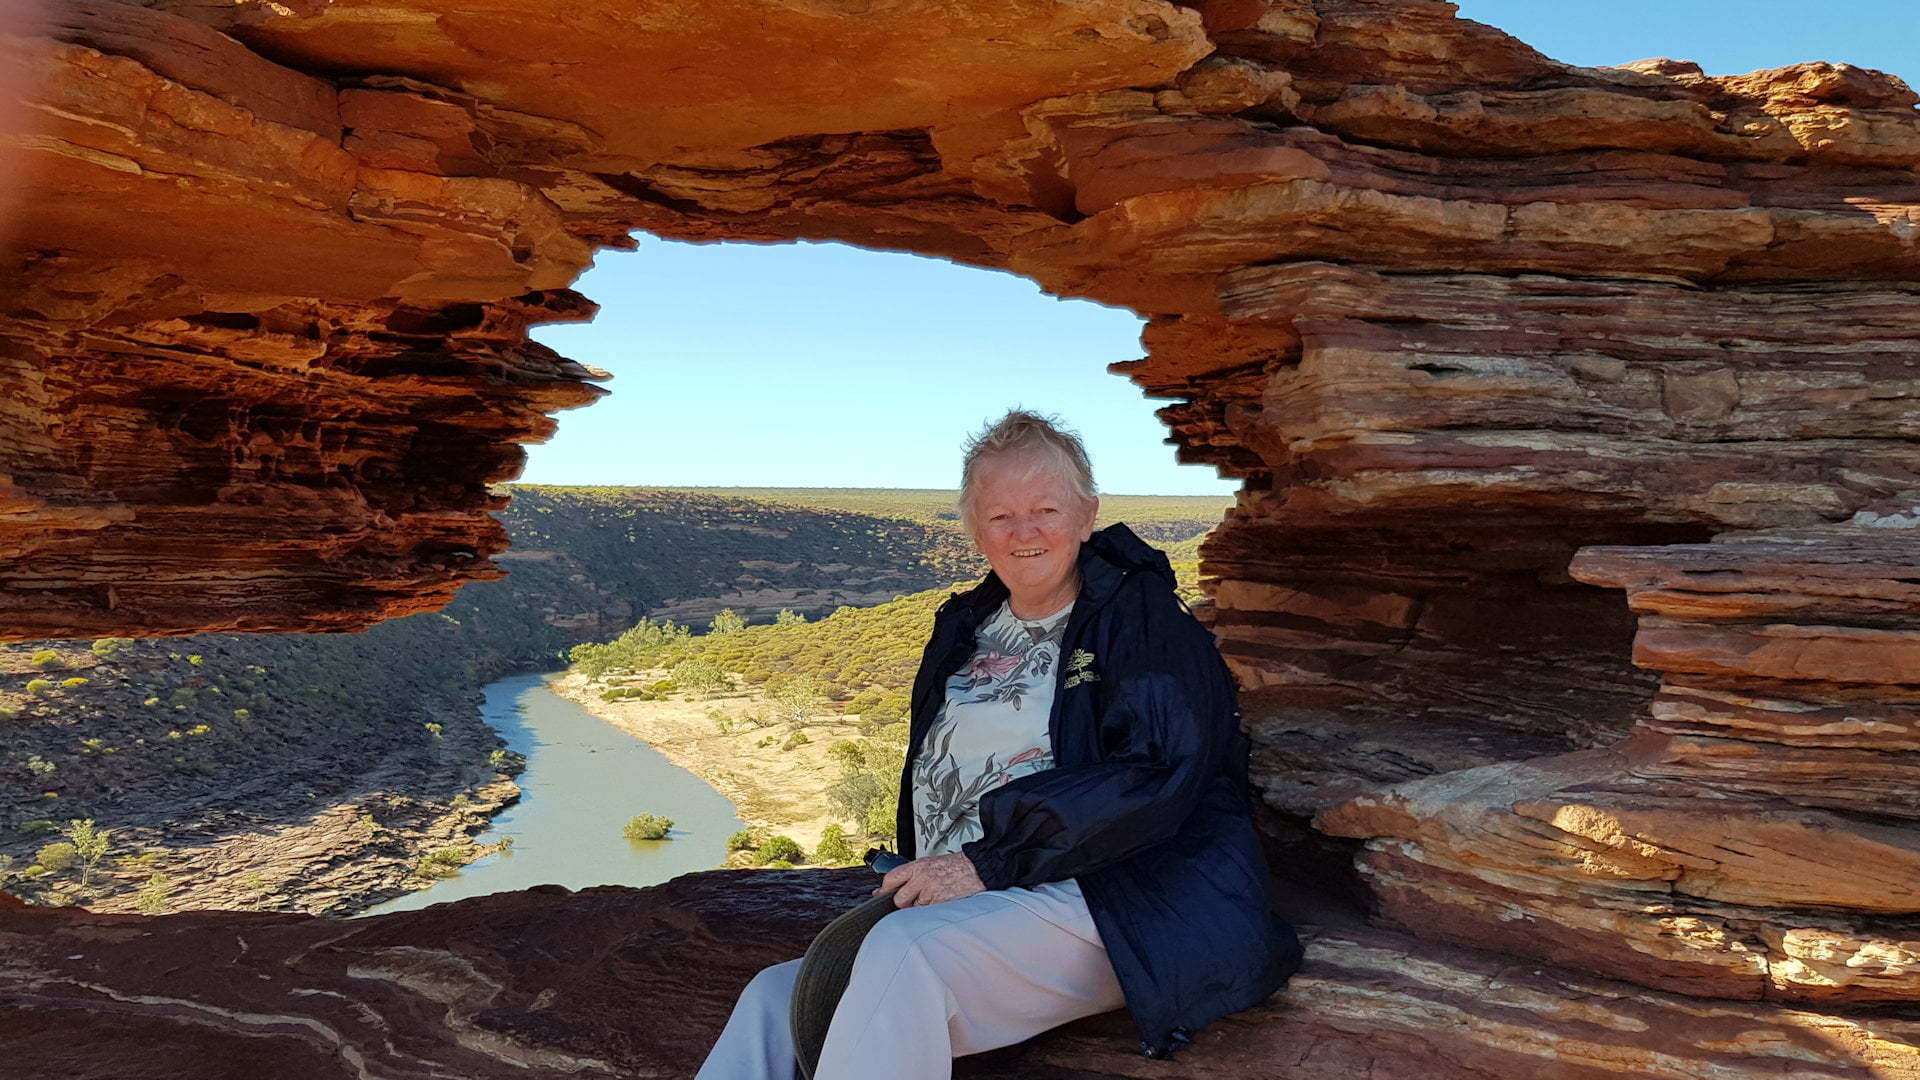 Woman sitting in front of a rock formation called Natures Window with a river in the background